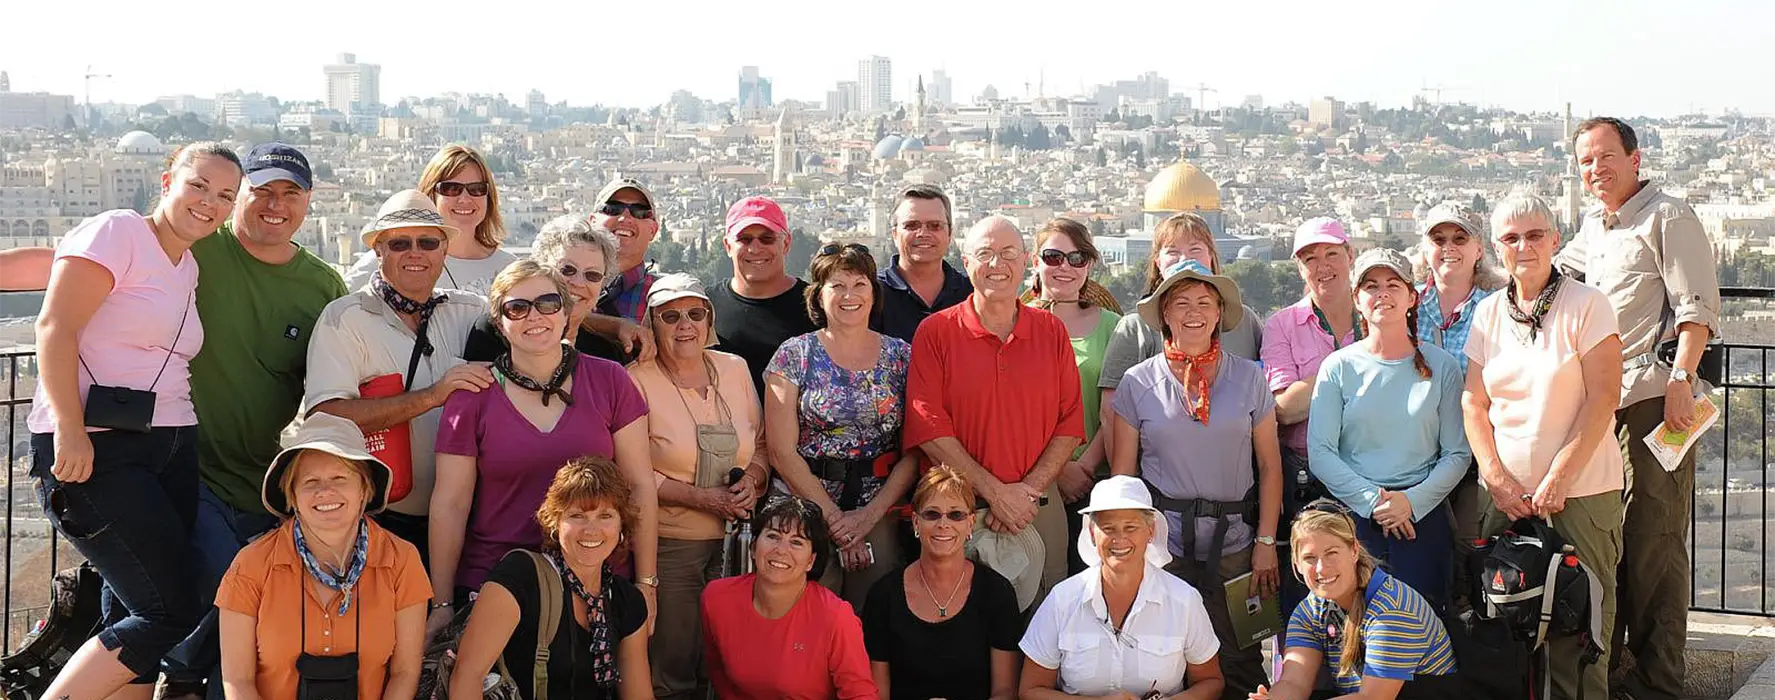 A photo of a group with Jerusalem in the background.